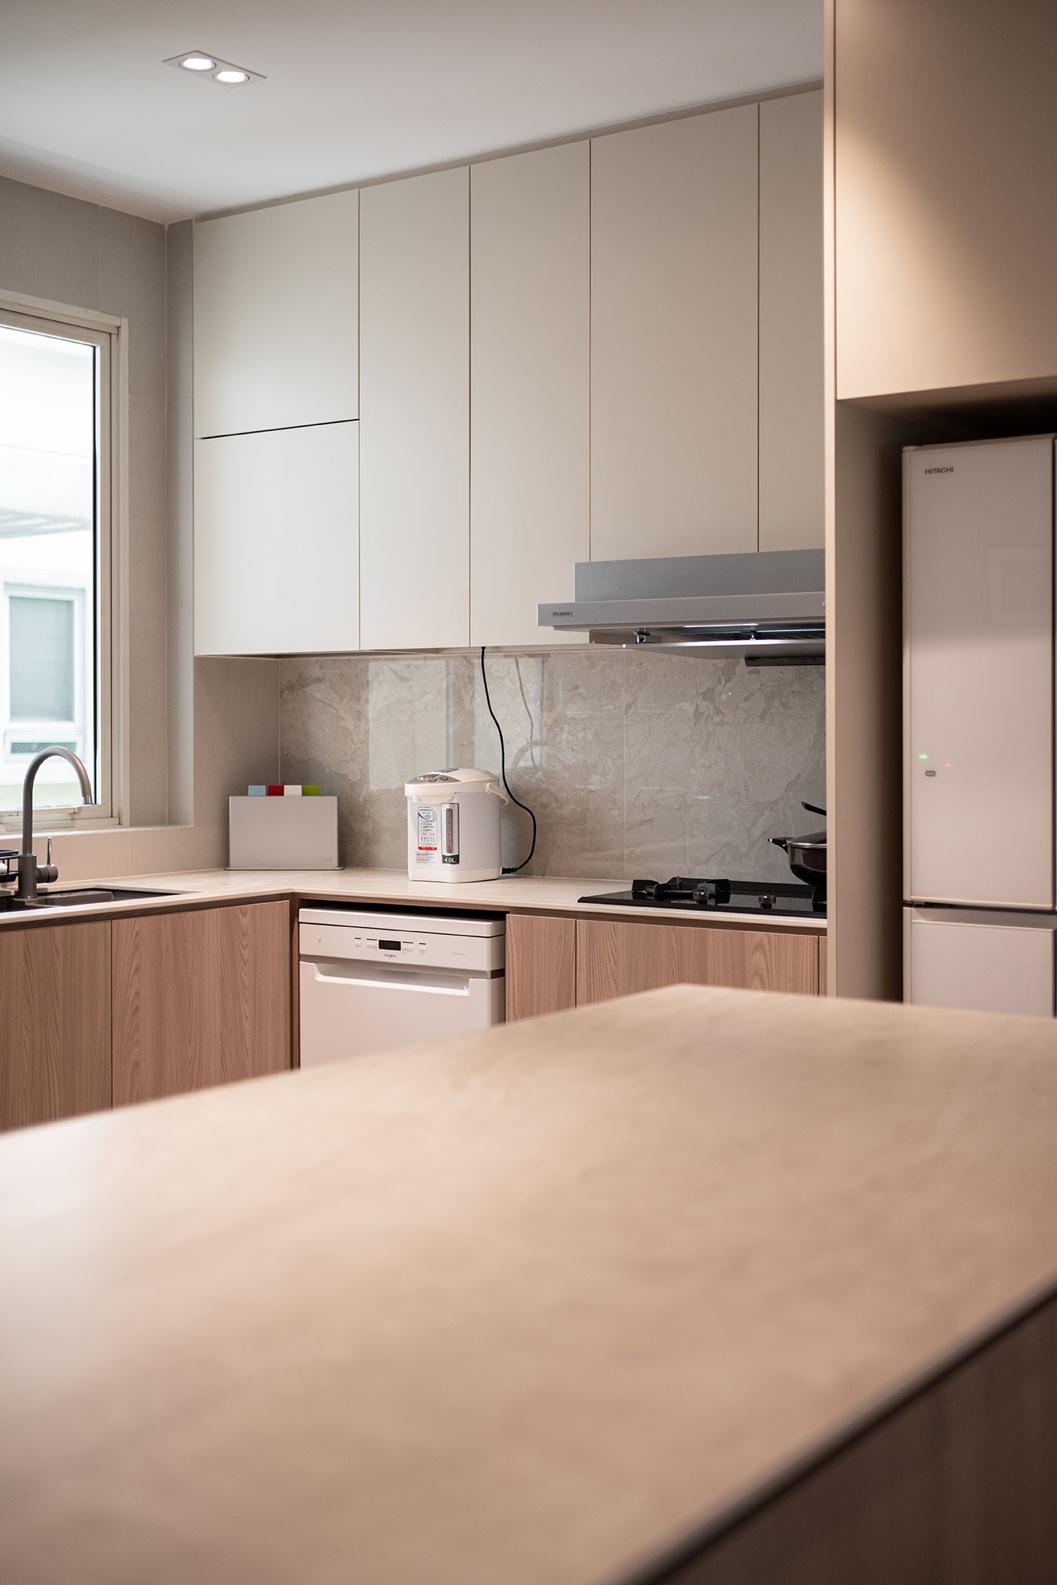 A kitchen with white cabinets and a countertop

Description automatically generated